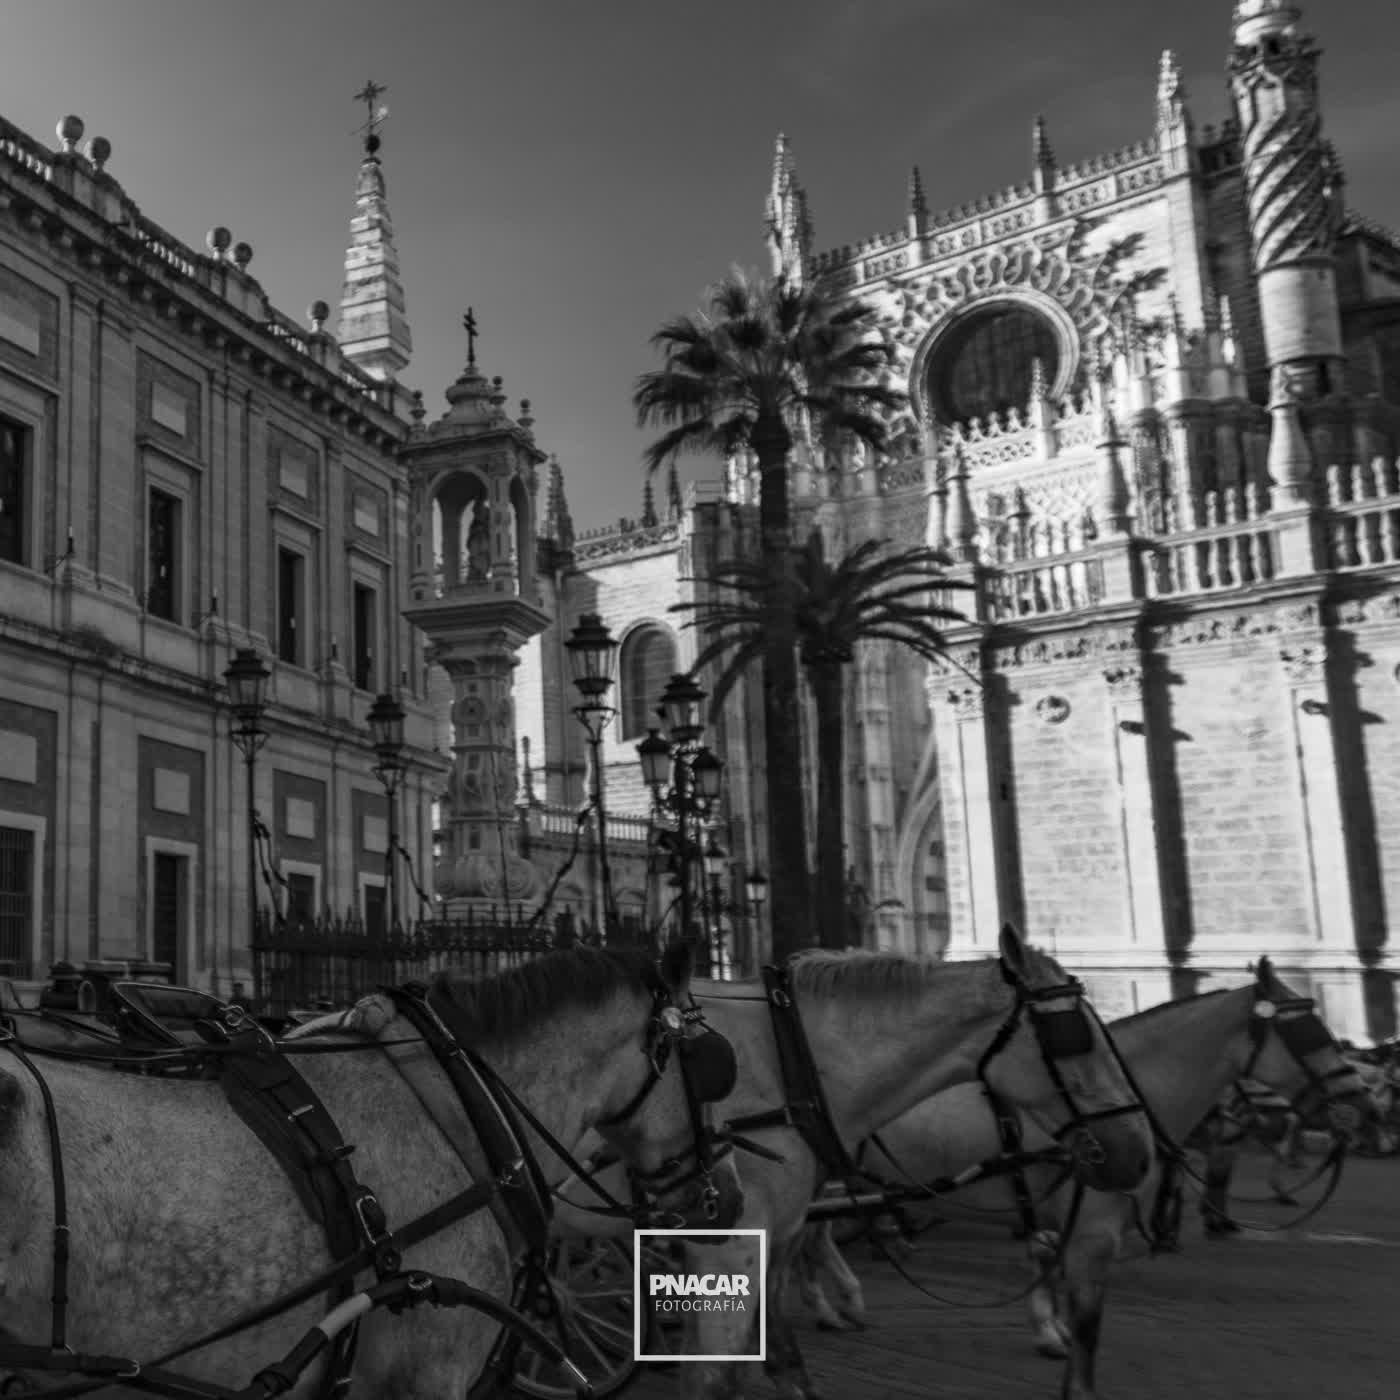 Sevilla's Giralda, with horse riding carriages